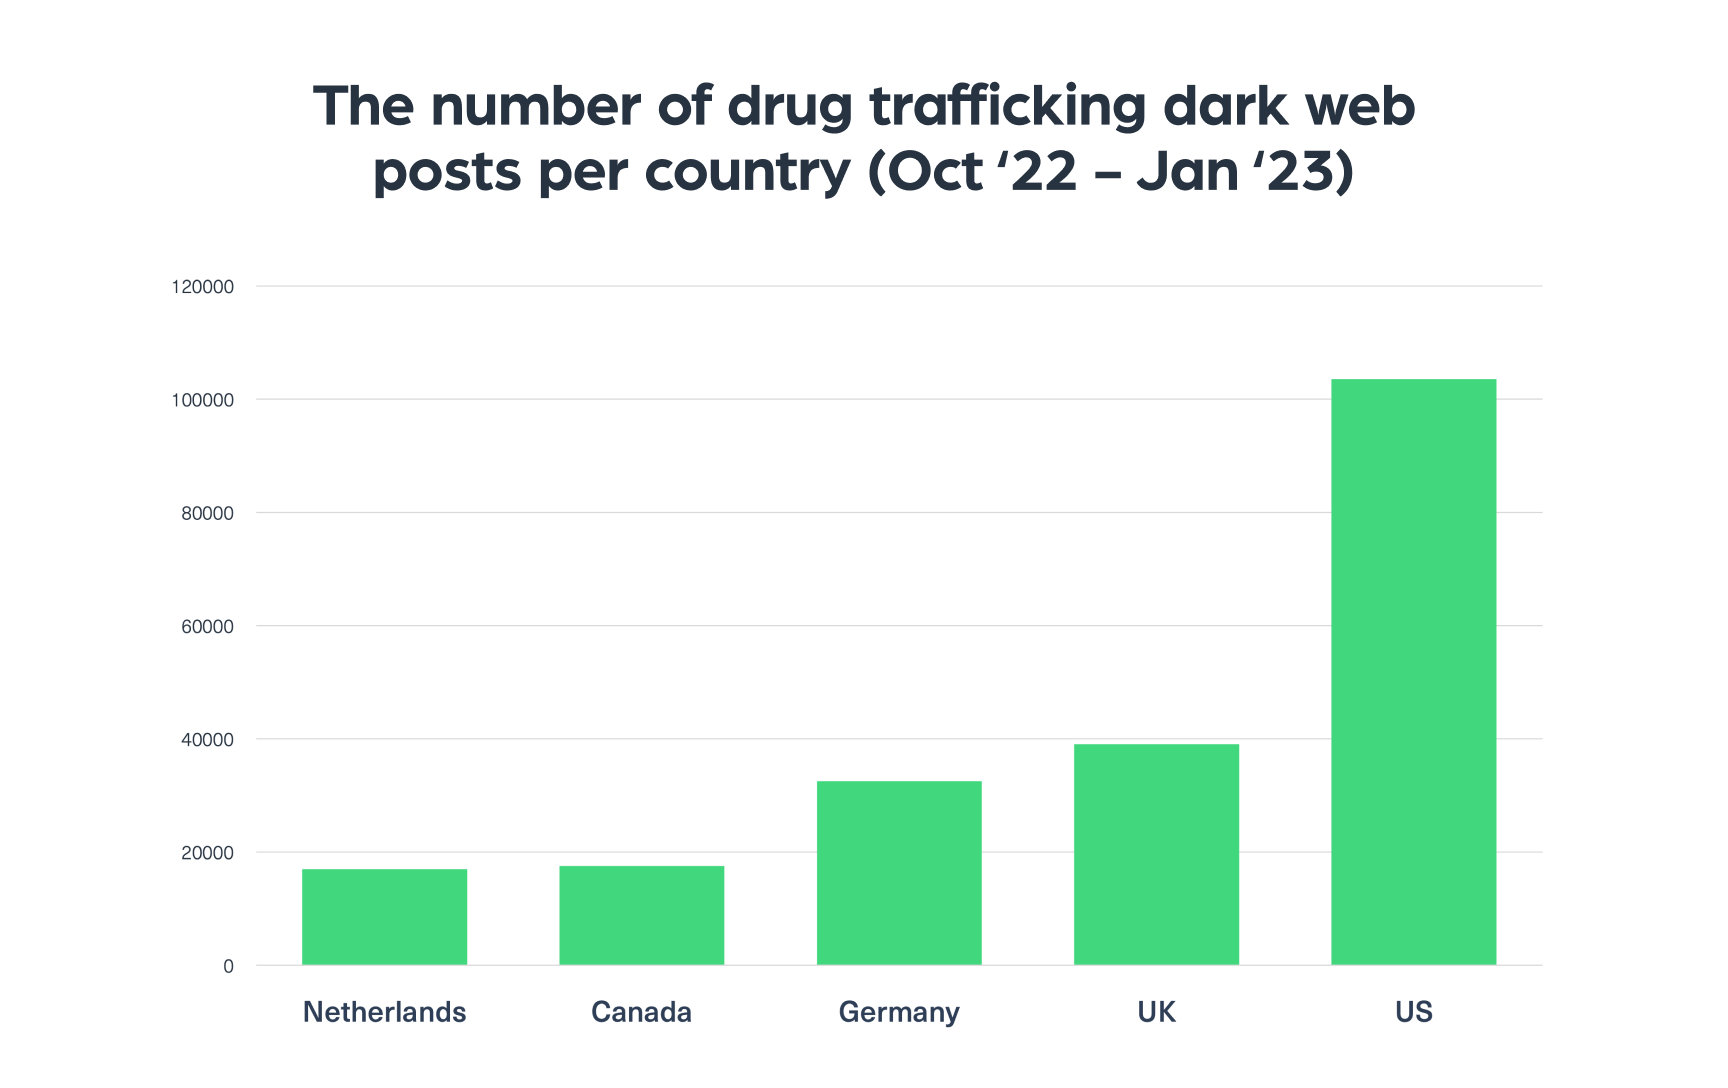 Drug trafficking-related dark web posts per country over the past 3 months